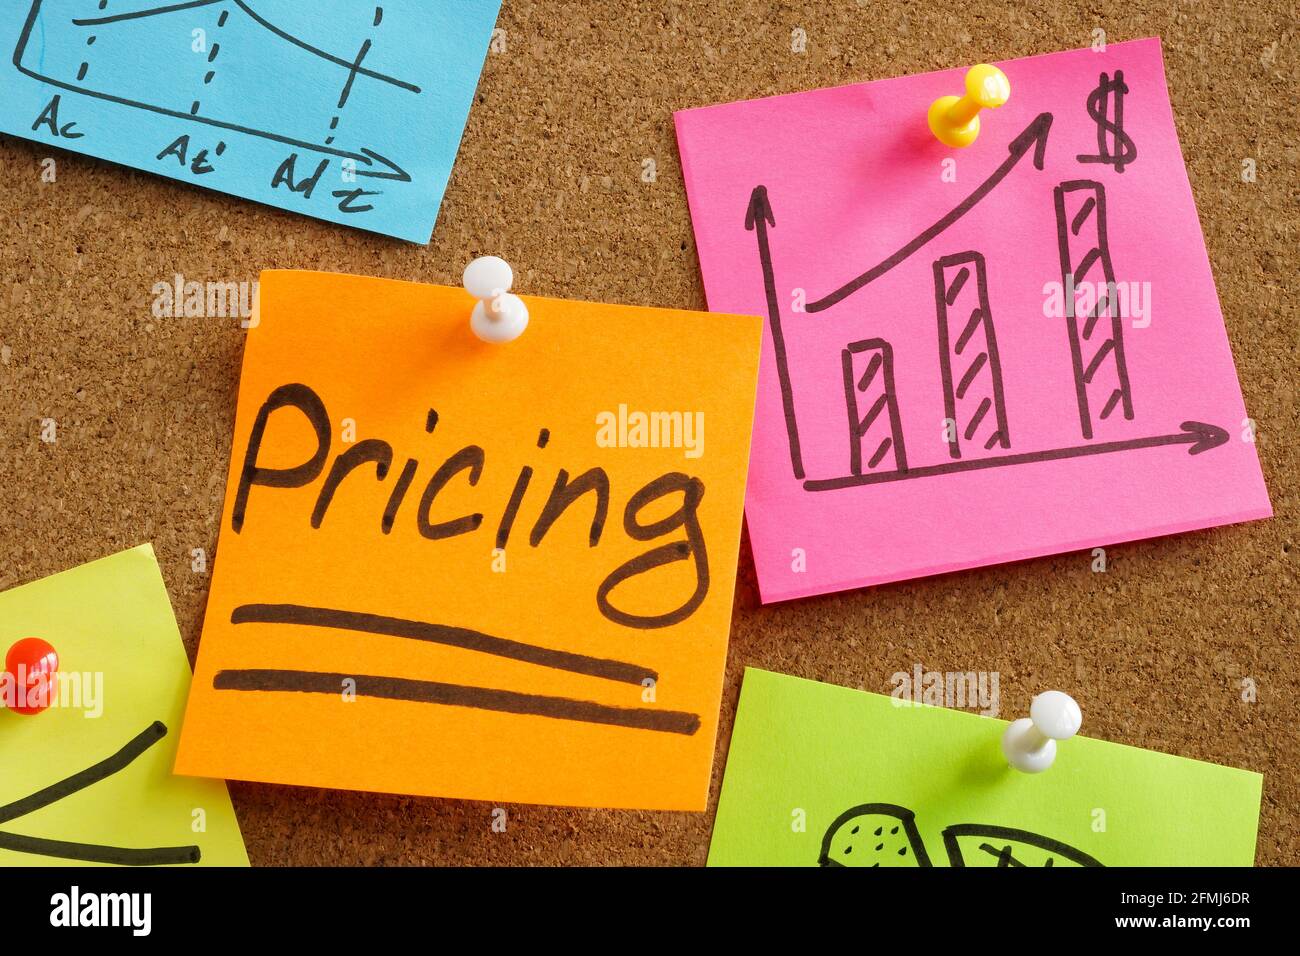 Word Pricing about strategy and planning and memo sticks. Stock Photo